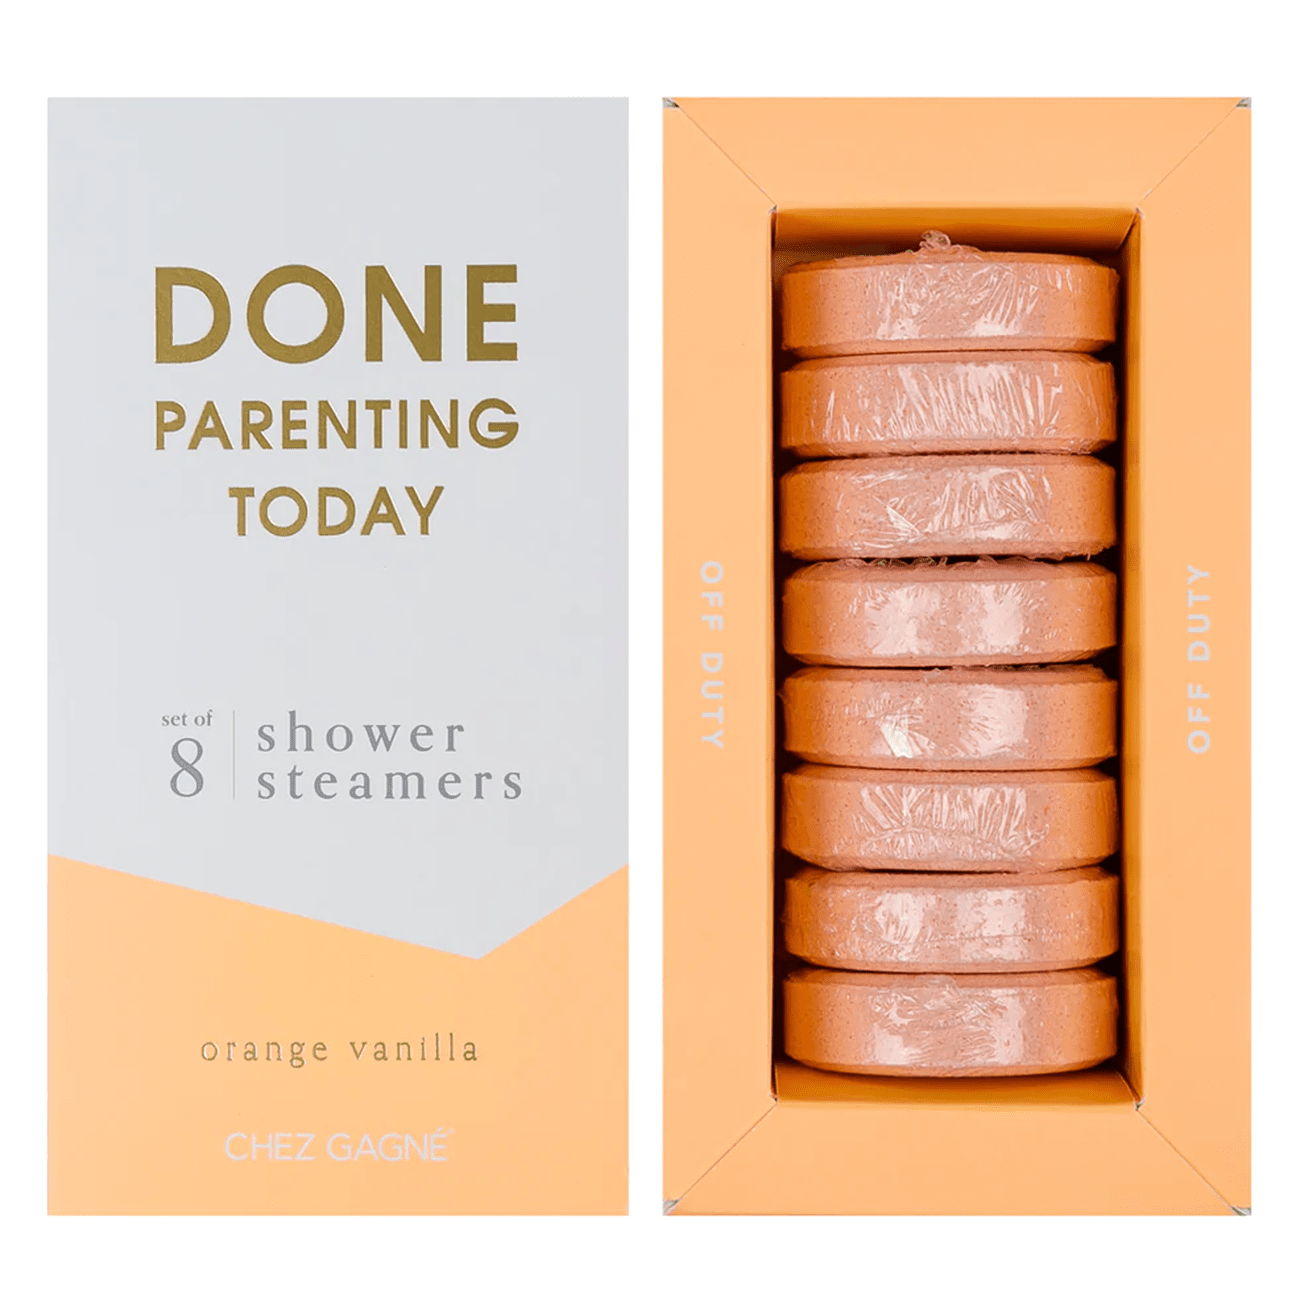 Done Parenting Today Shower Steamers Skin + Body